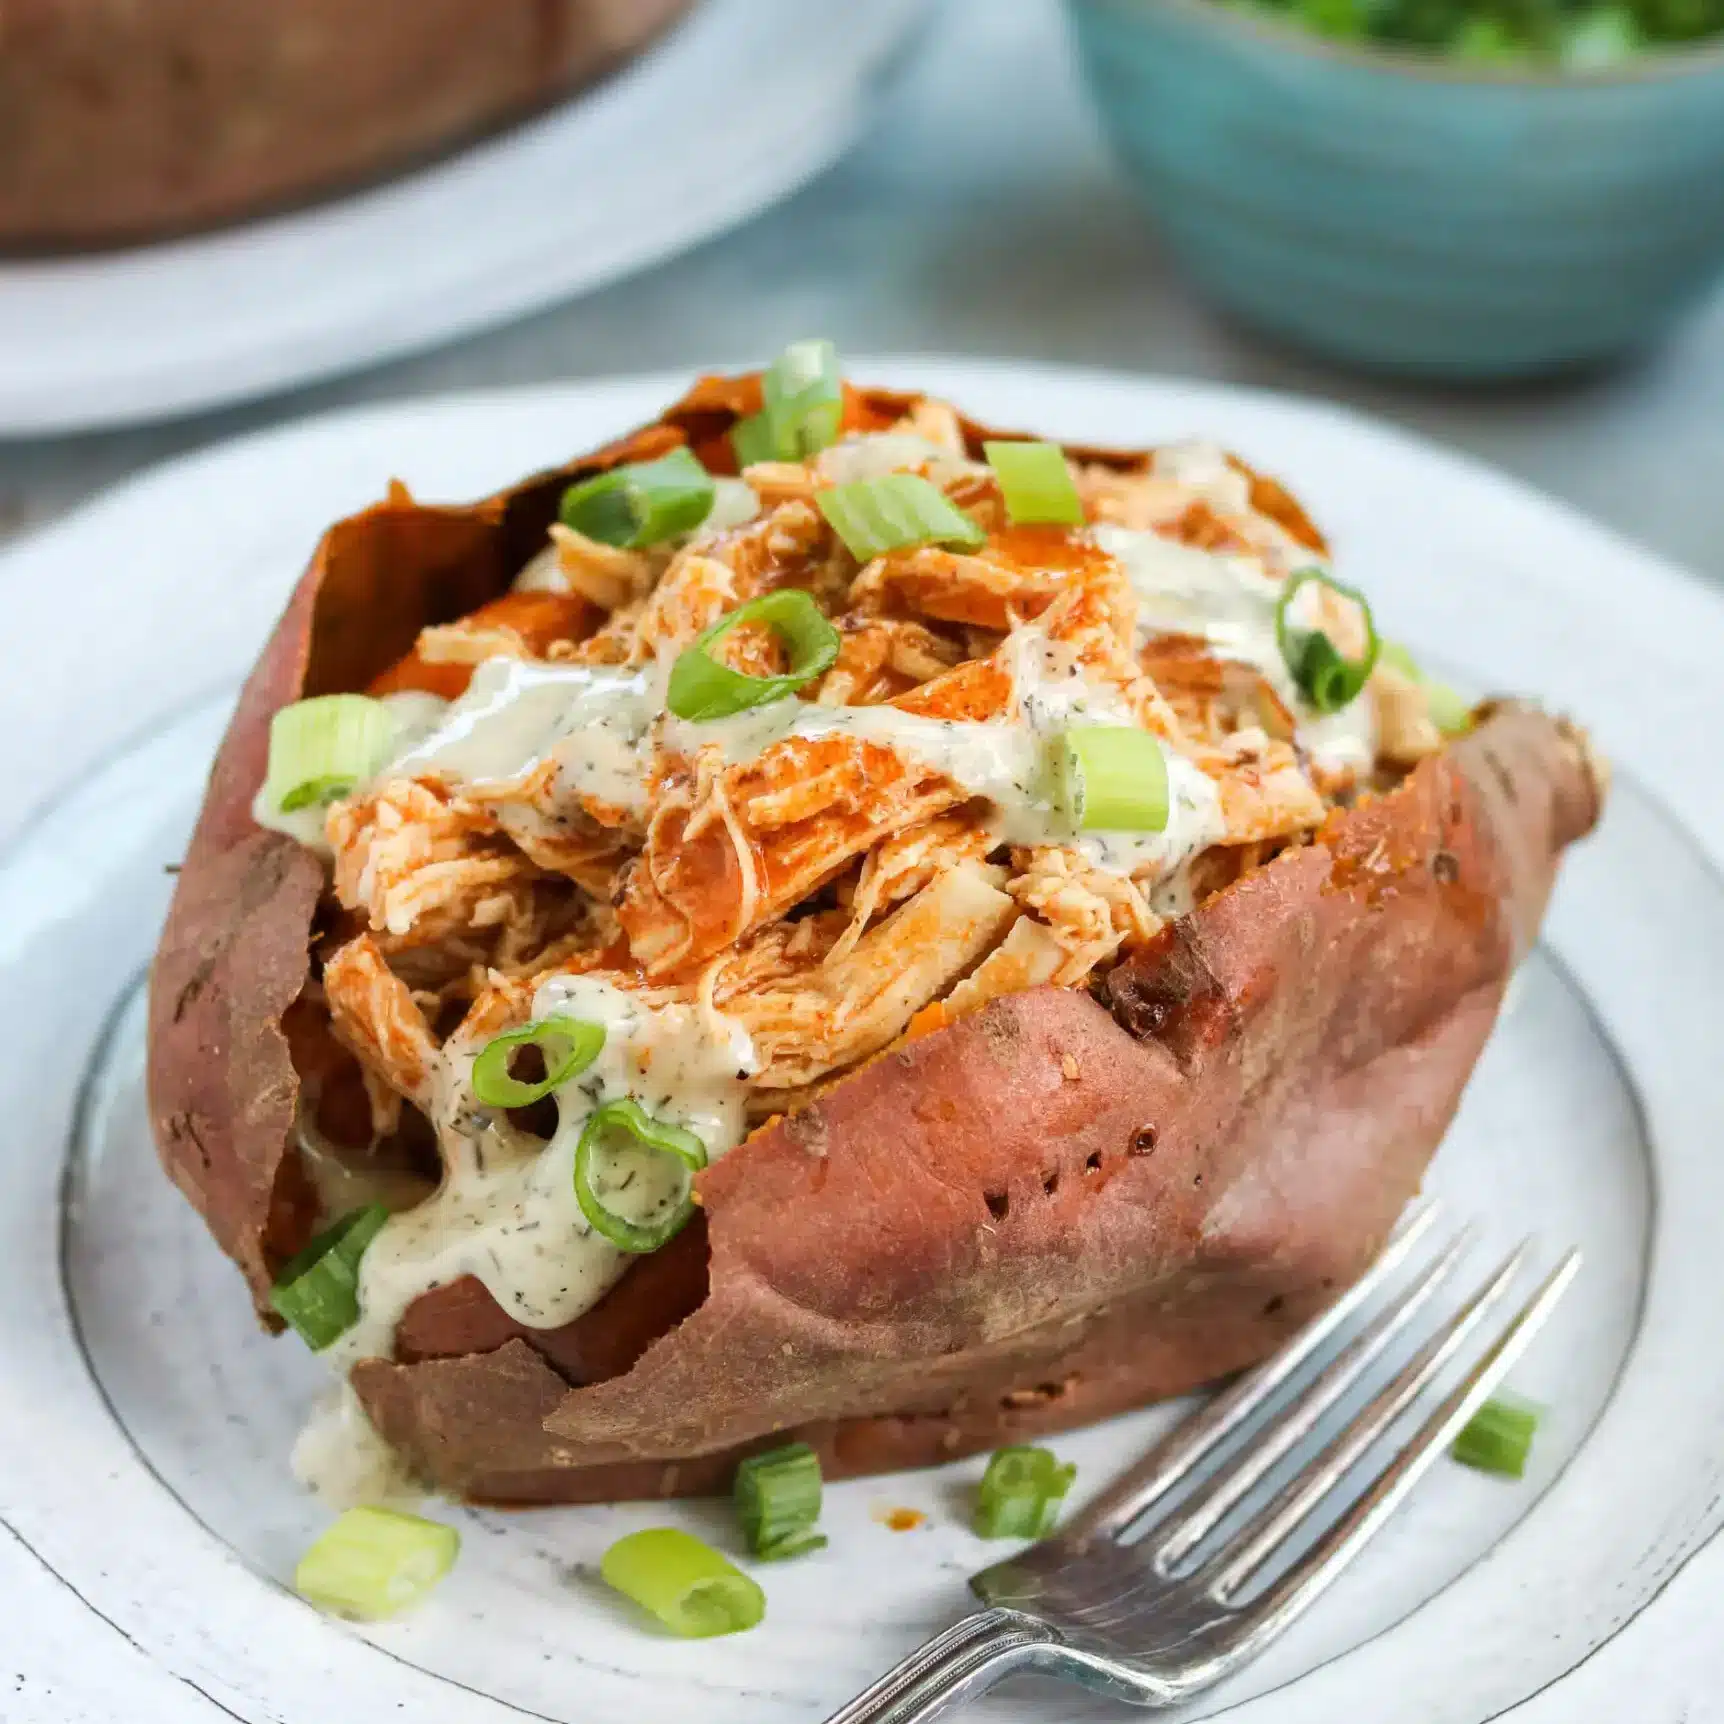 A sweet potato on a plate filled with buffalo chicken and topped with dressing and green onions.